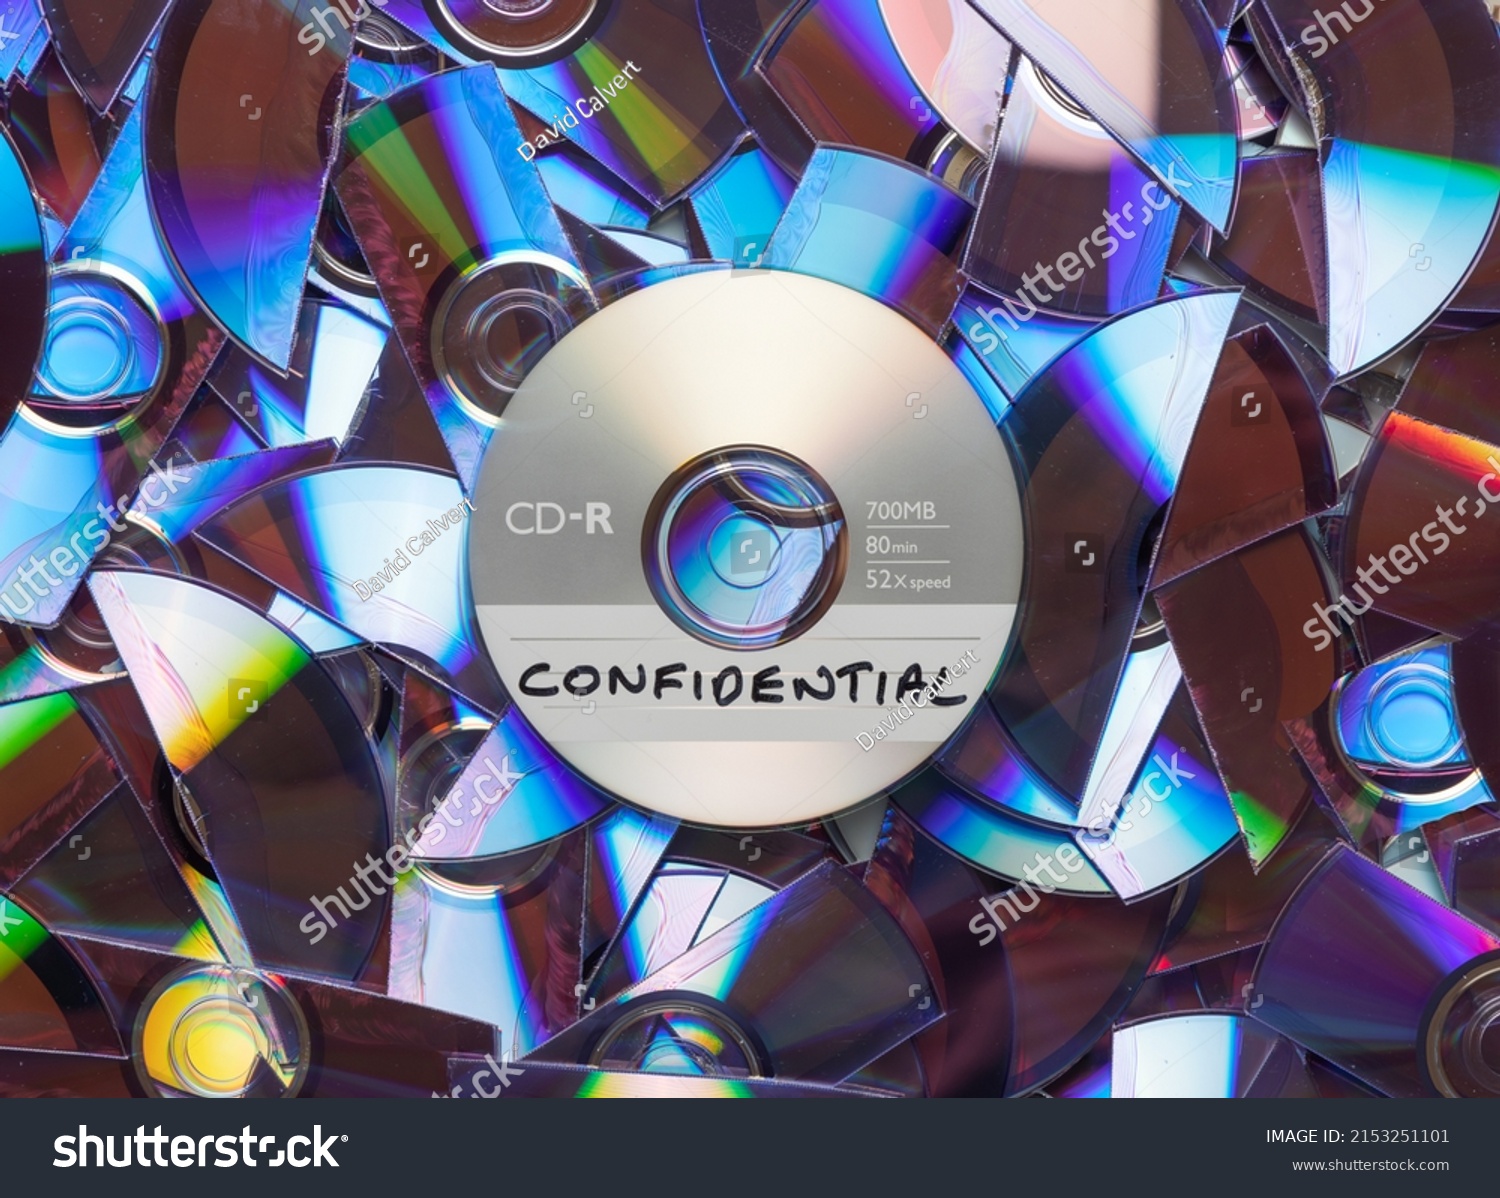 CD with confidential written on it, with shredded CD's and DVD's in the background. #2153251101